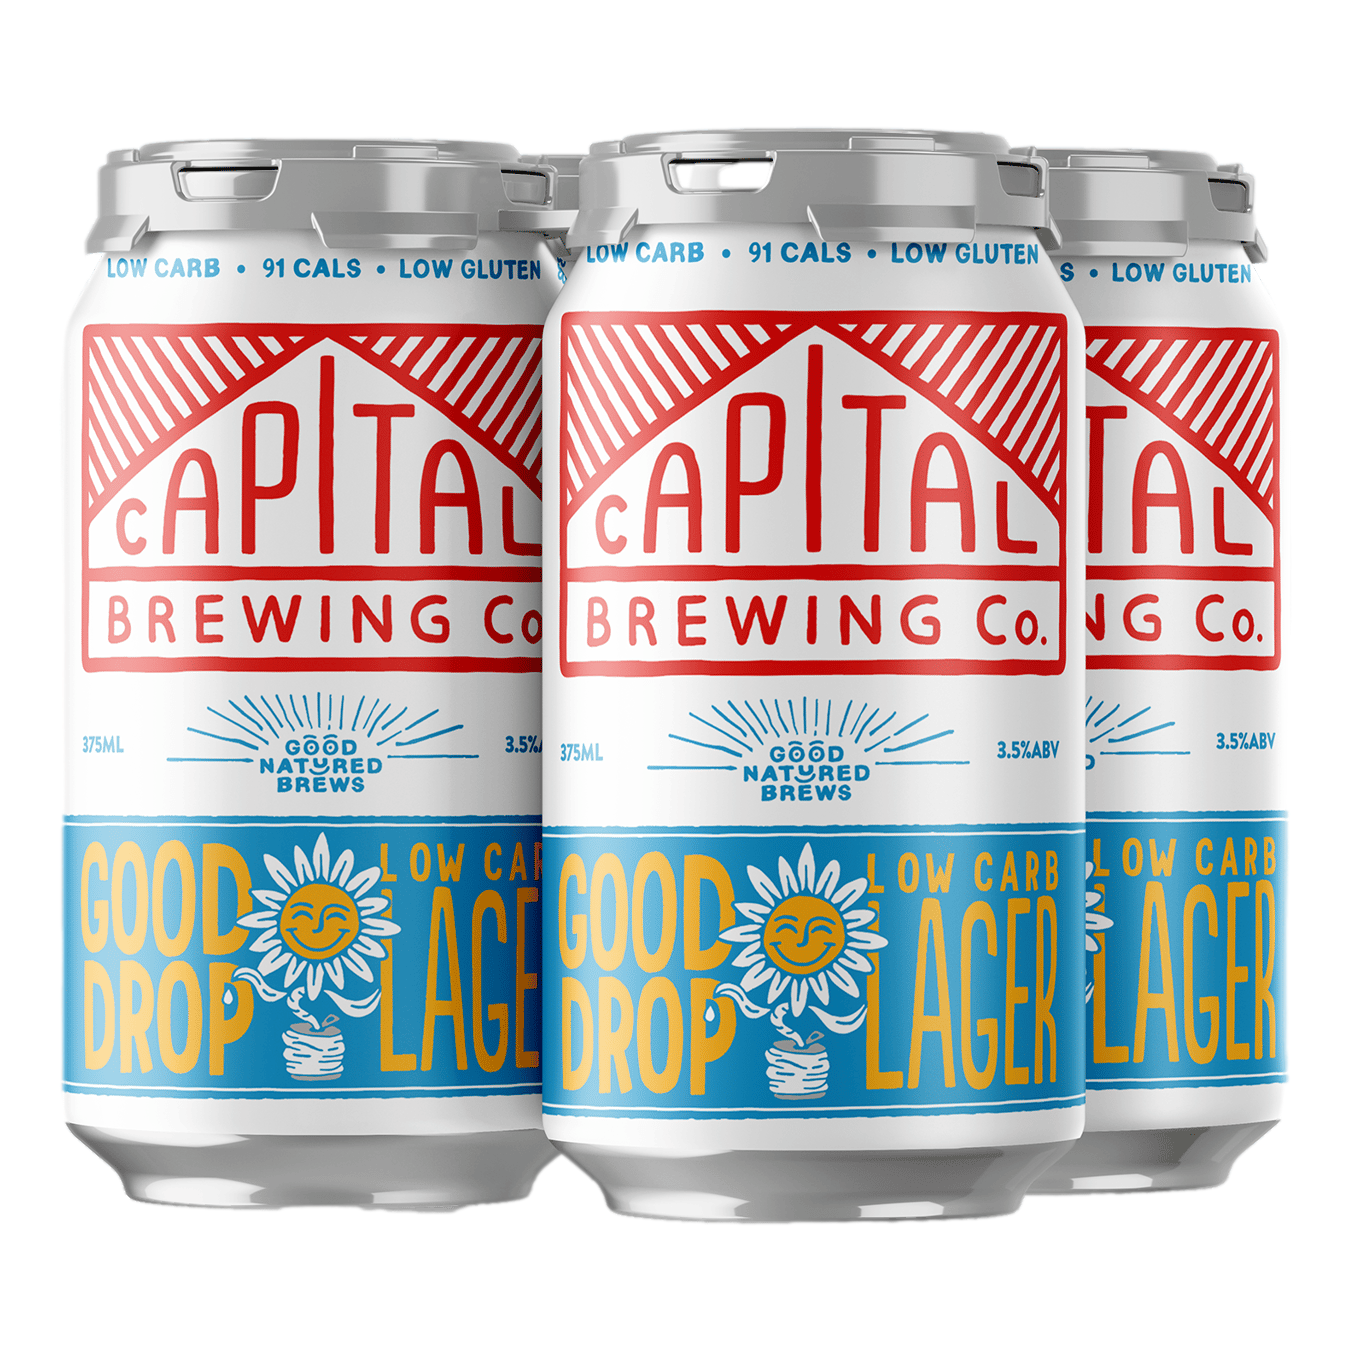 Capital Brewing Co. Good Drop Low Carb Lager 3.5% 375ml Can 4 Pack